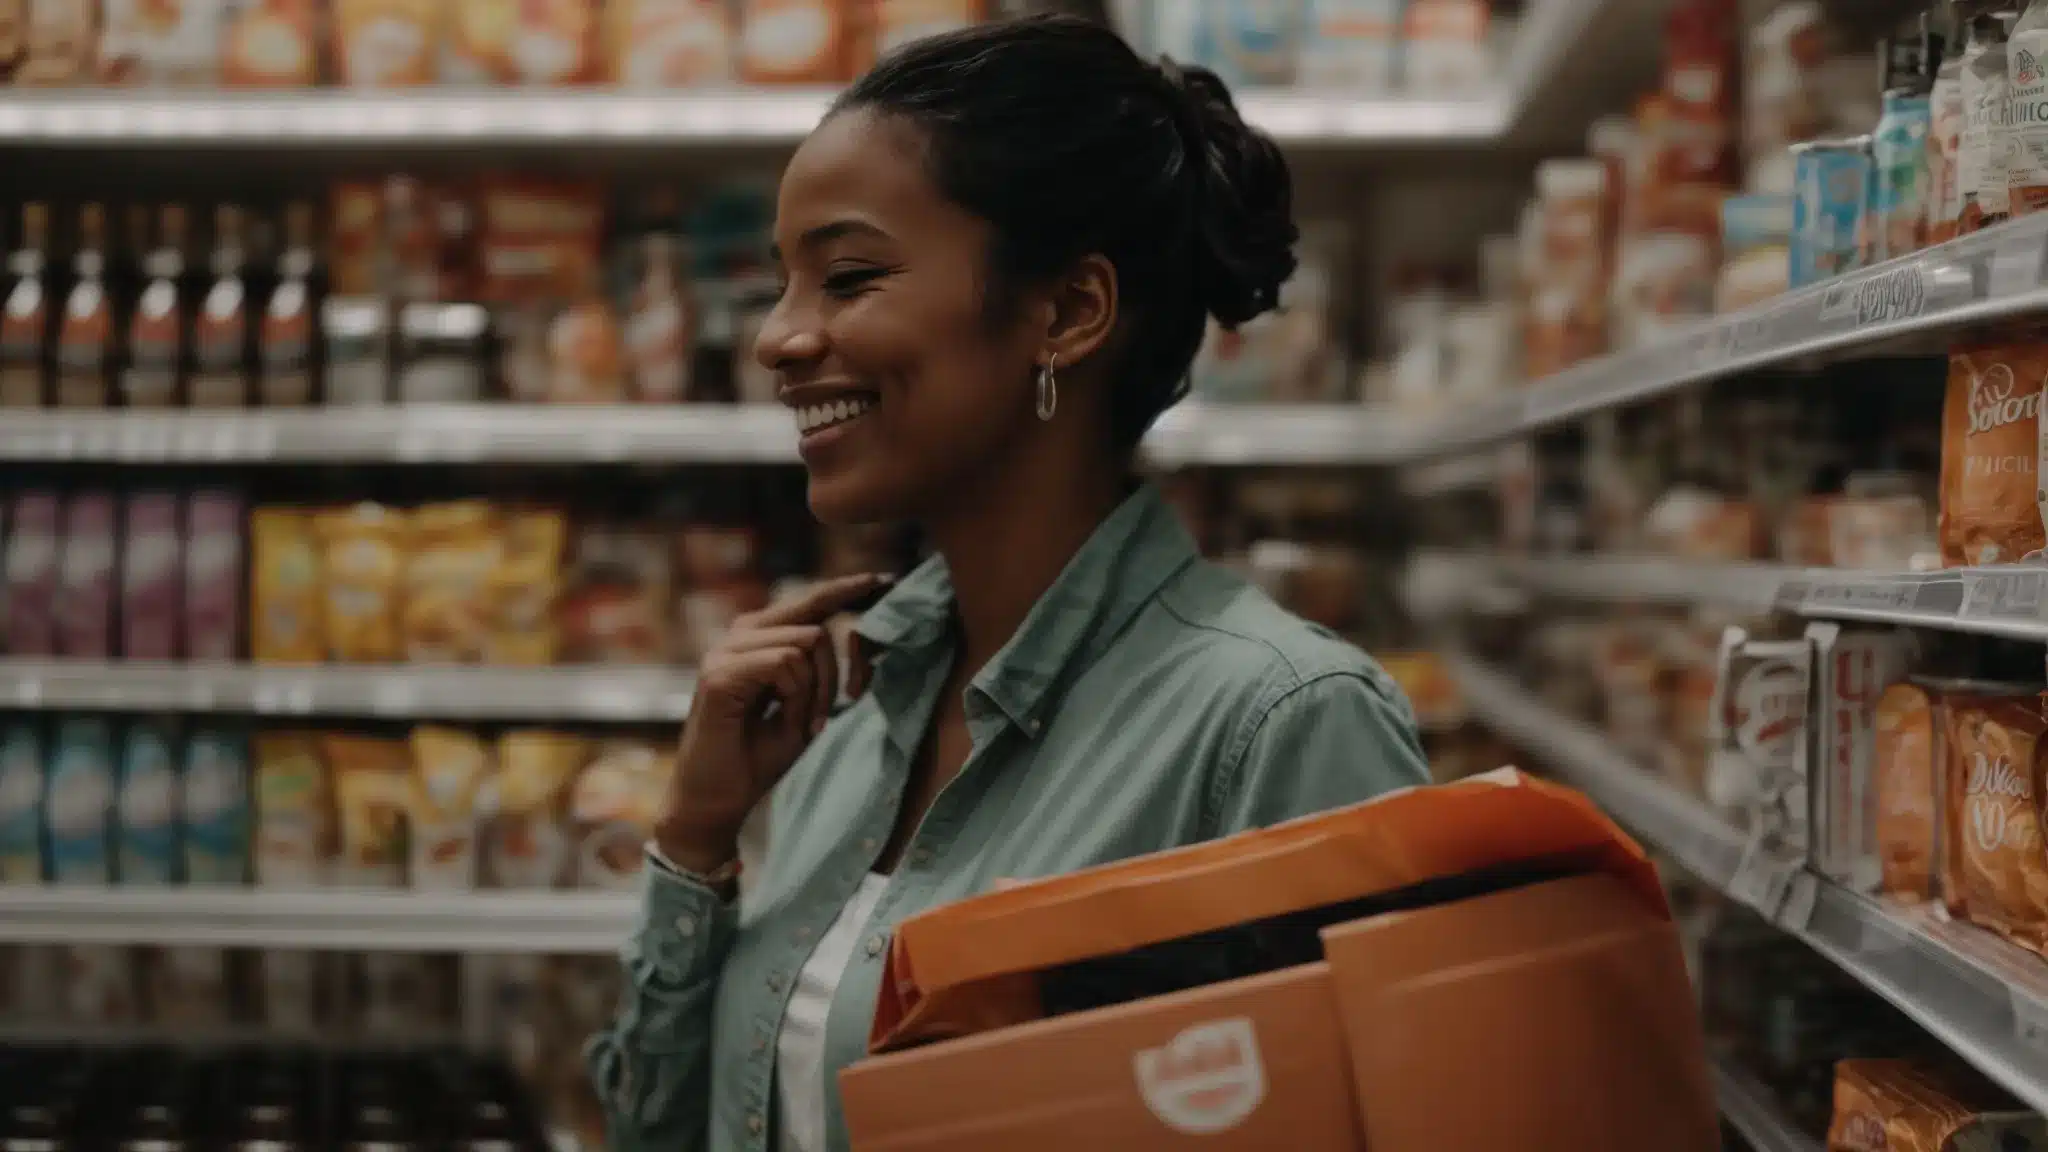 A Customer Smiling Contentedly While Holding A Product Near A Shelf Stocked With The Same Brand.